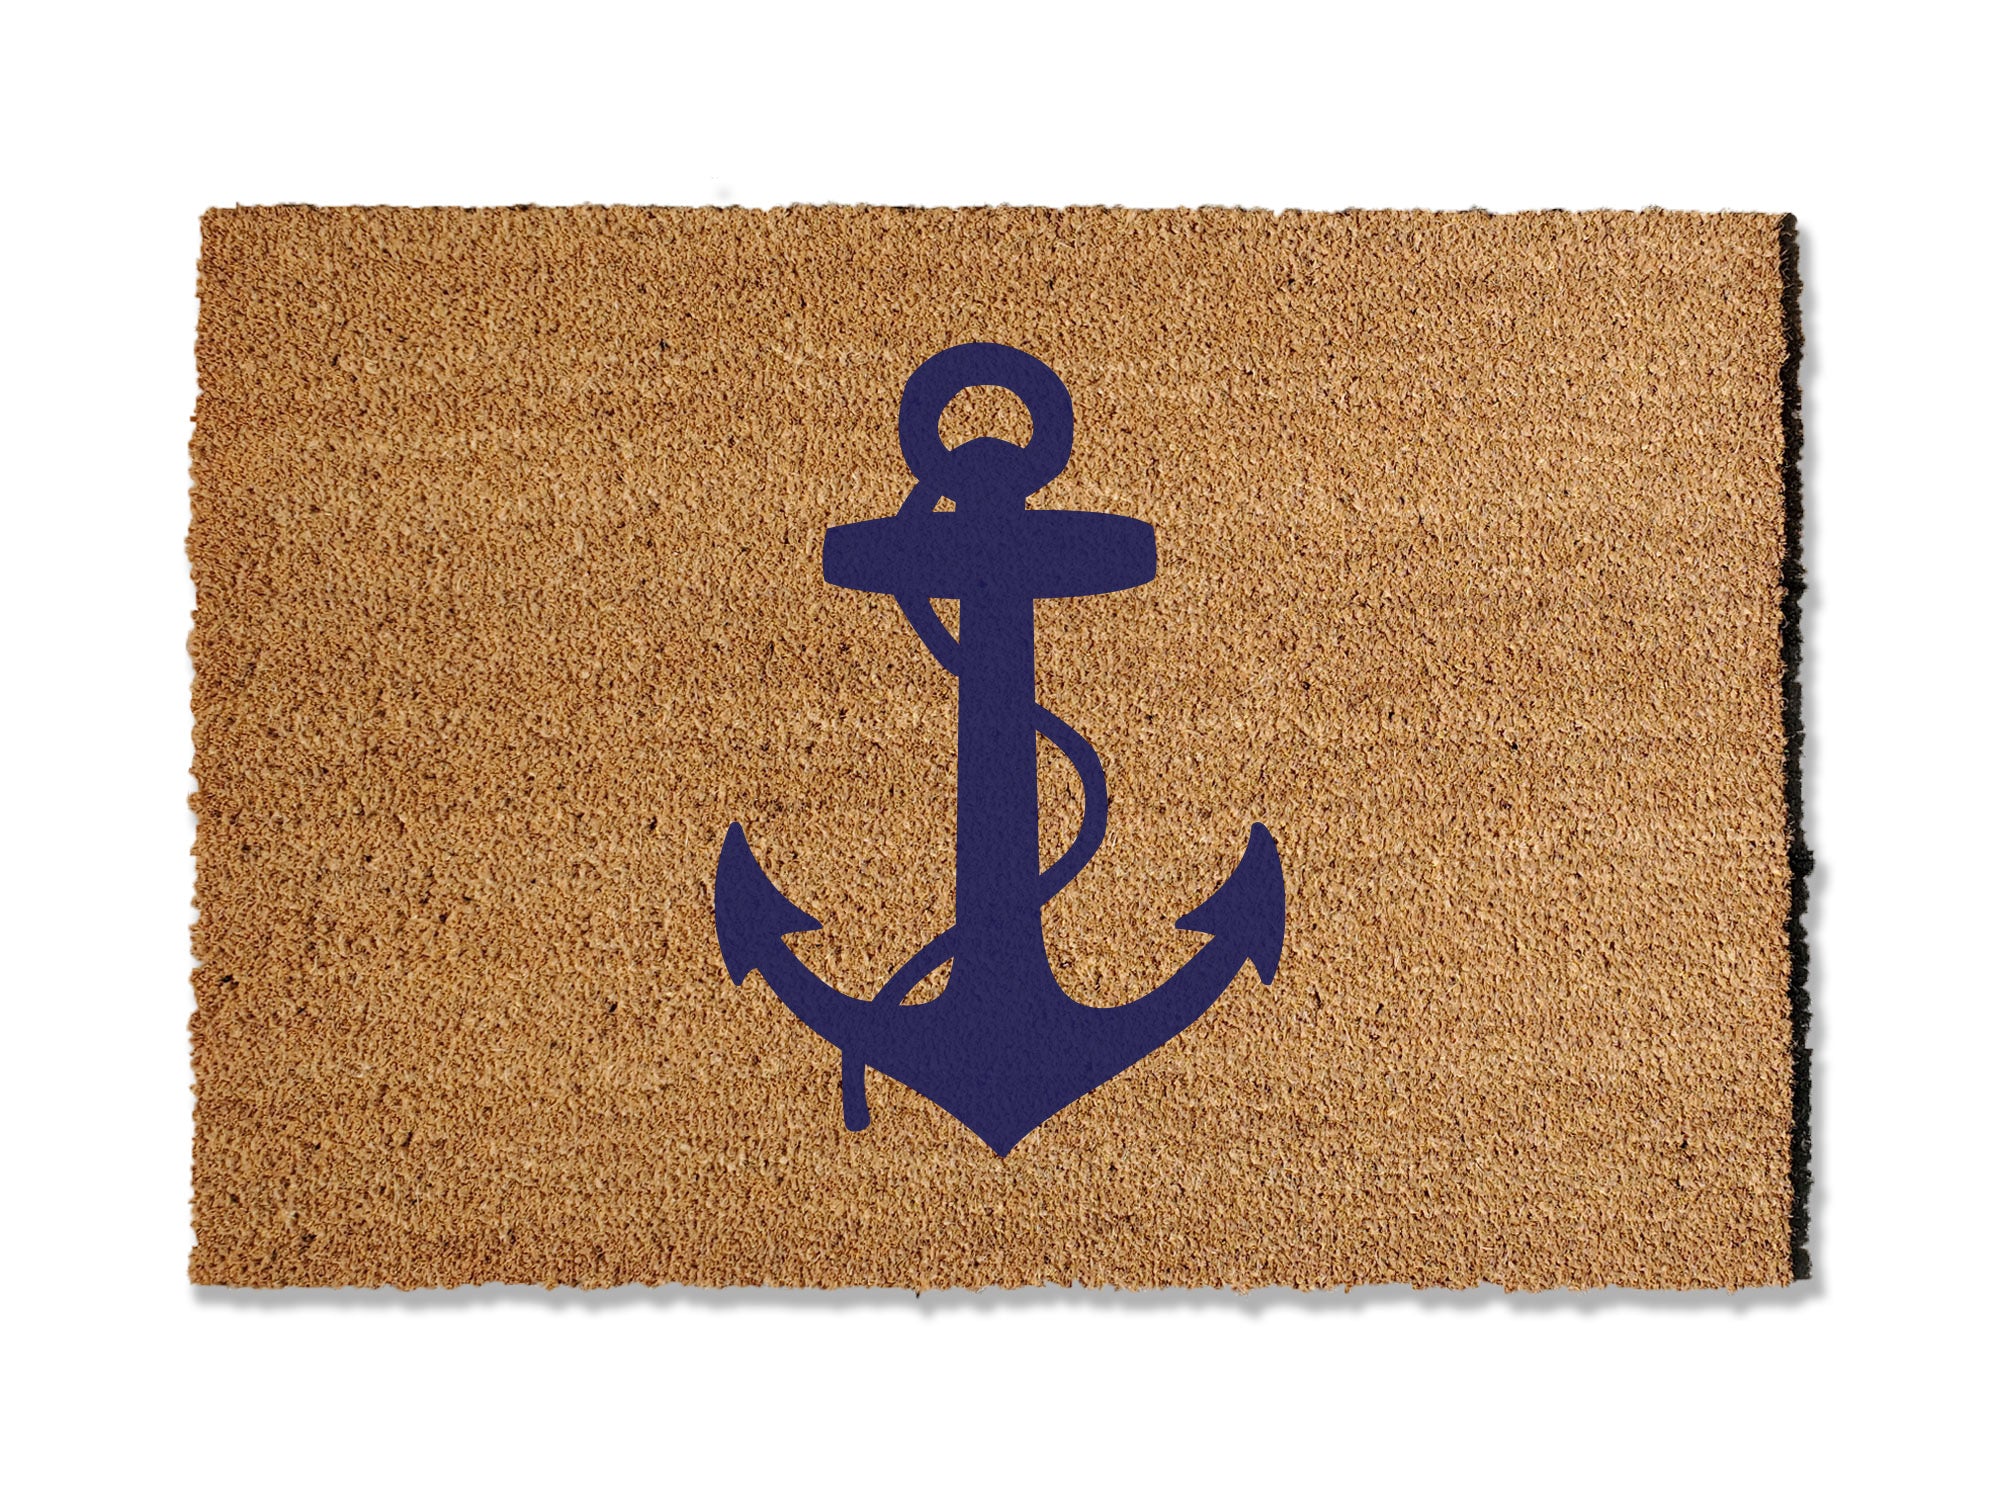 A coir doormat that is 24 inches by 36 inches and has a navy anchor printed on it.